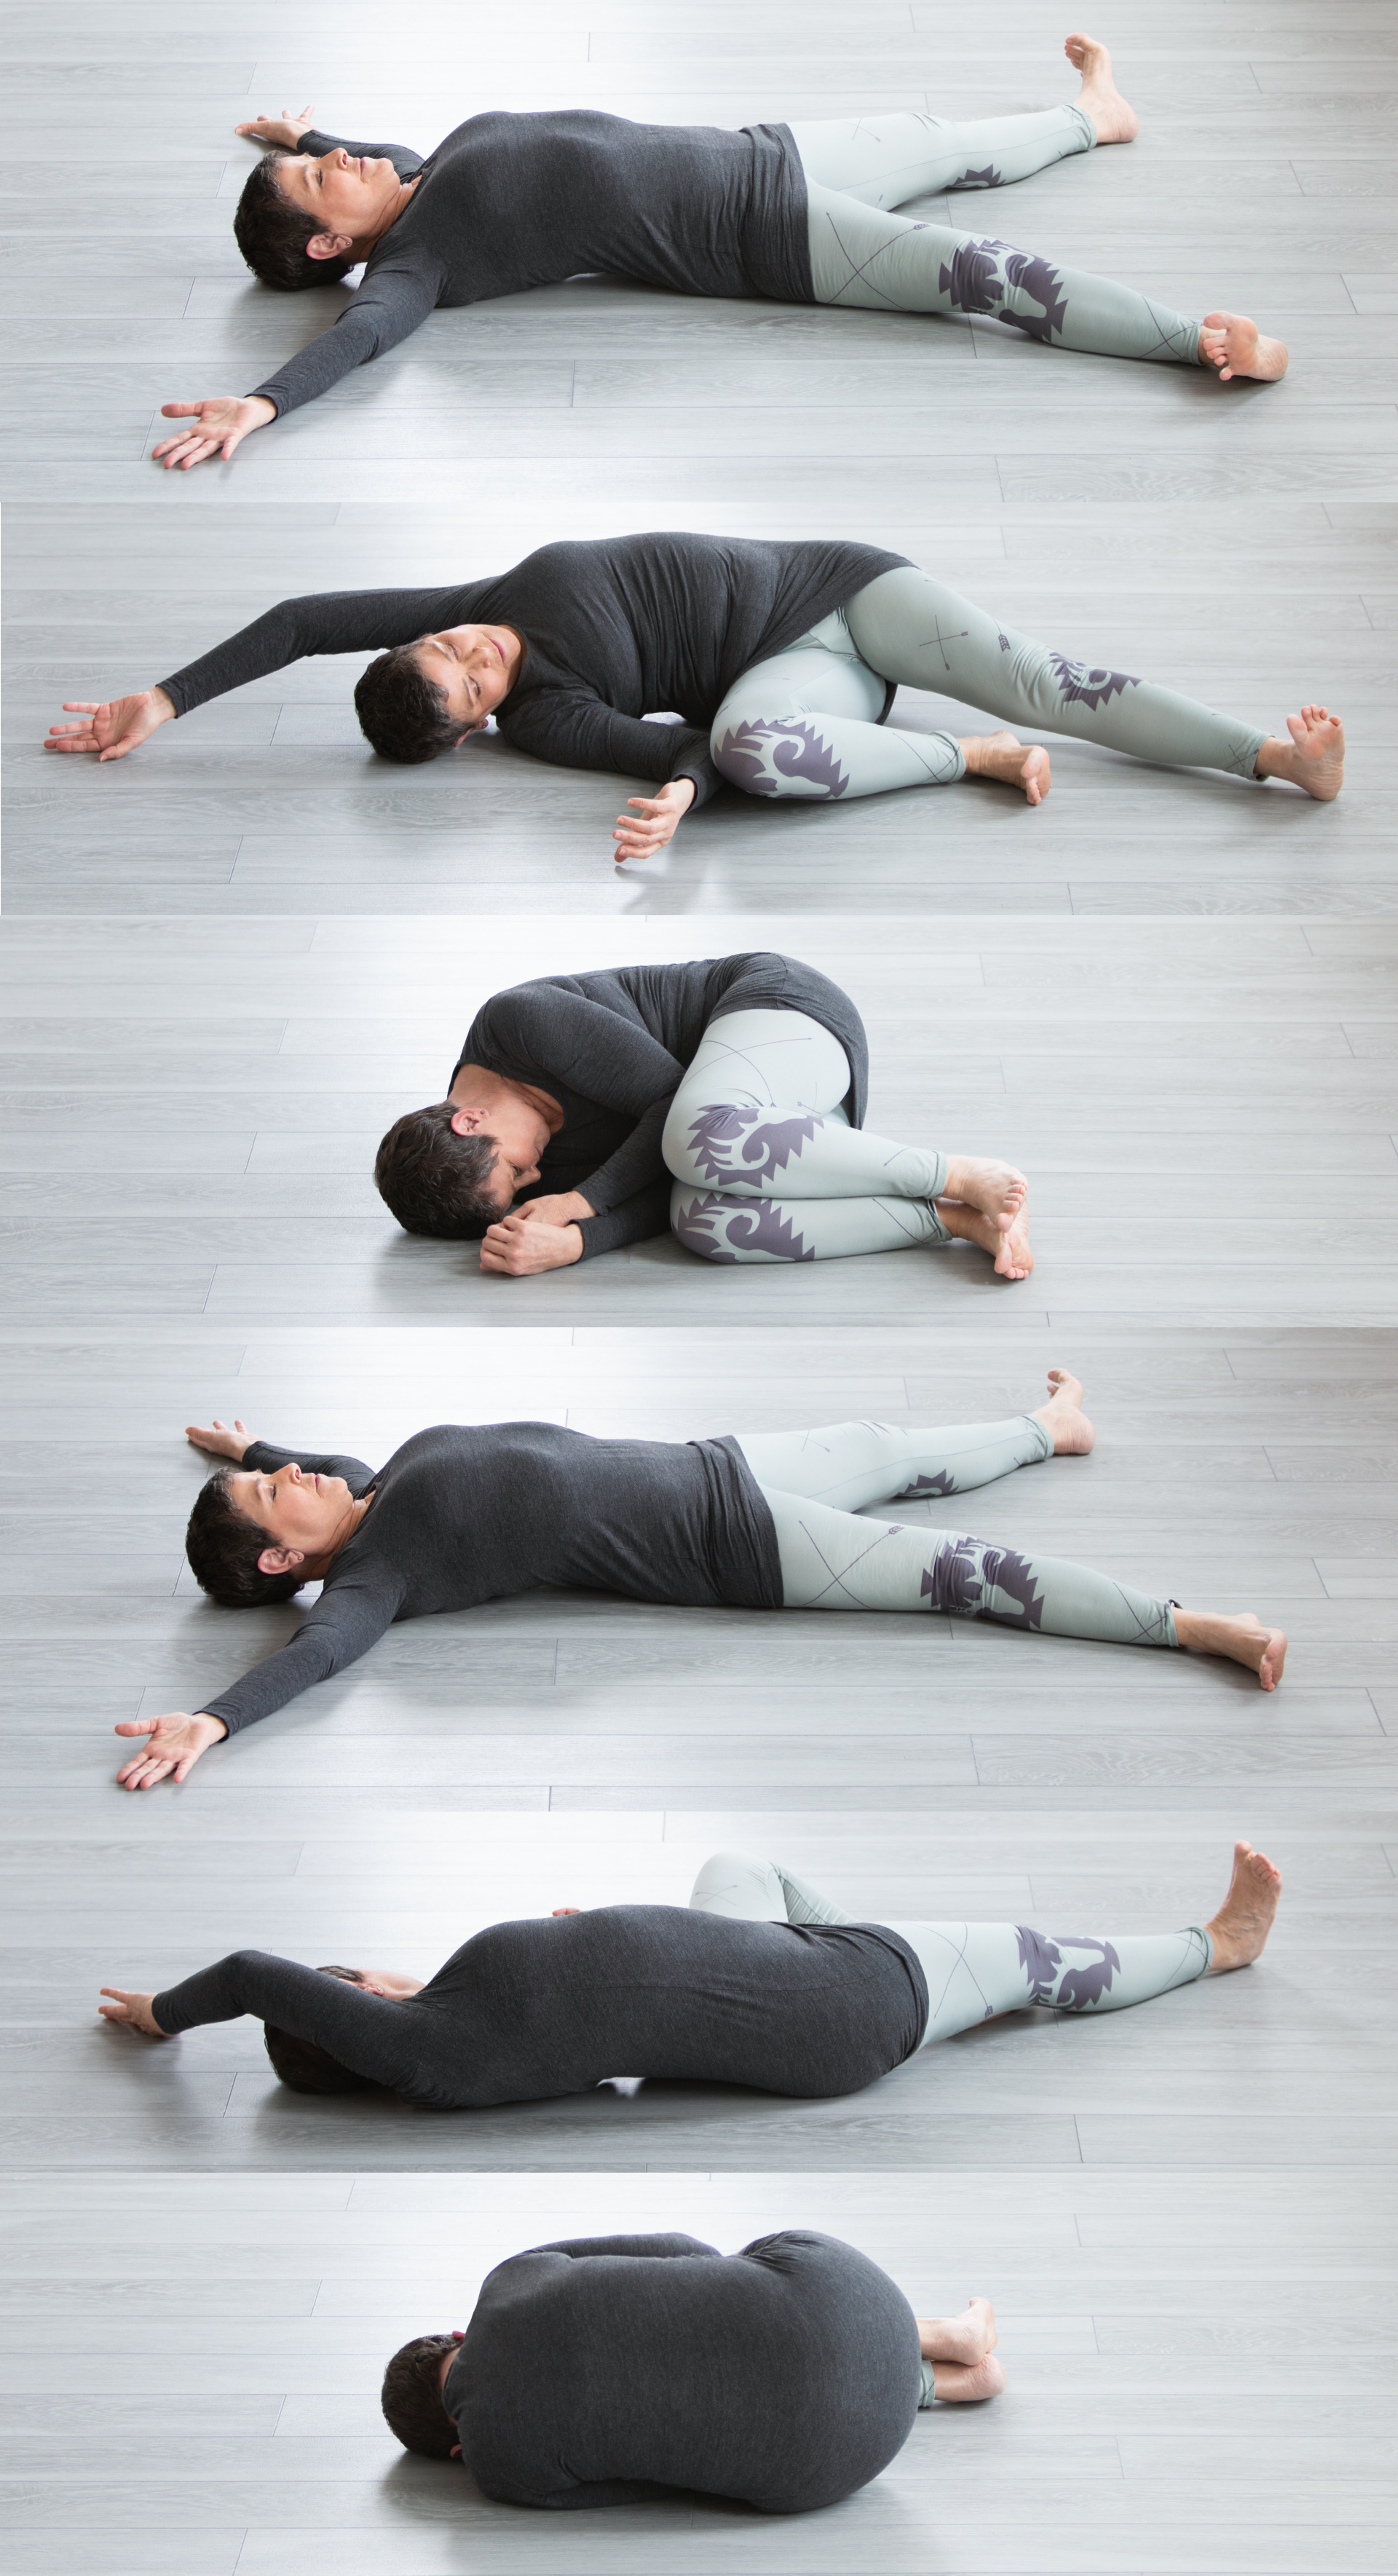 An Evening Yoga Practice to Help You Calm Down and Sleep